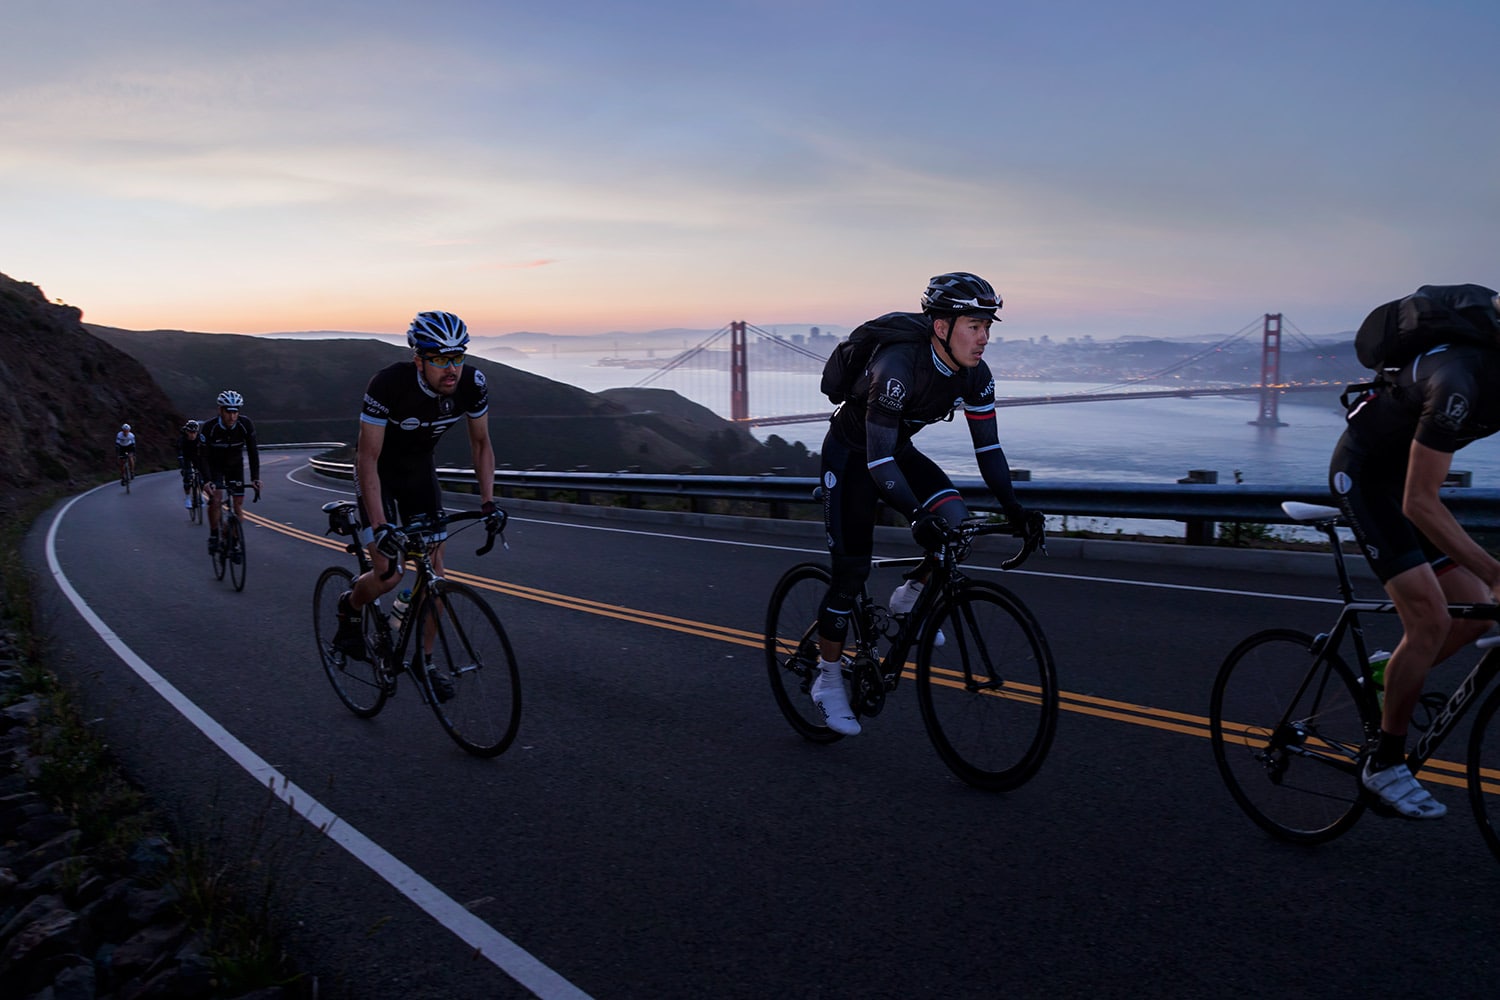 Athletes-Cyclists-ridding-up-hill-with-golden-gate-bridge-and-city-Rod-McLean